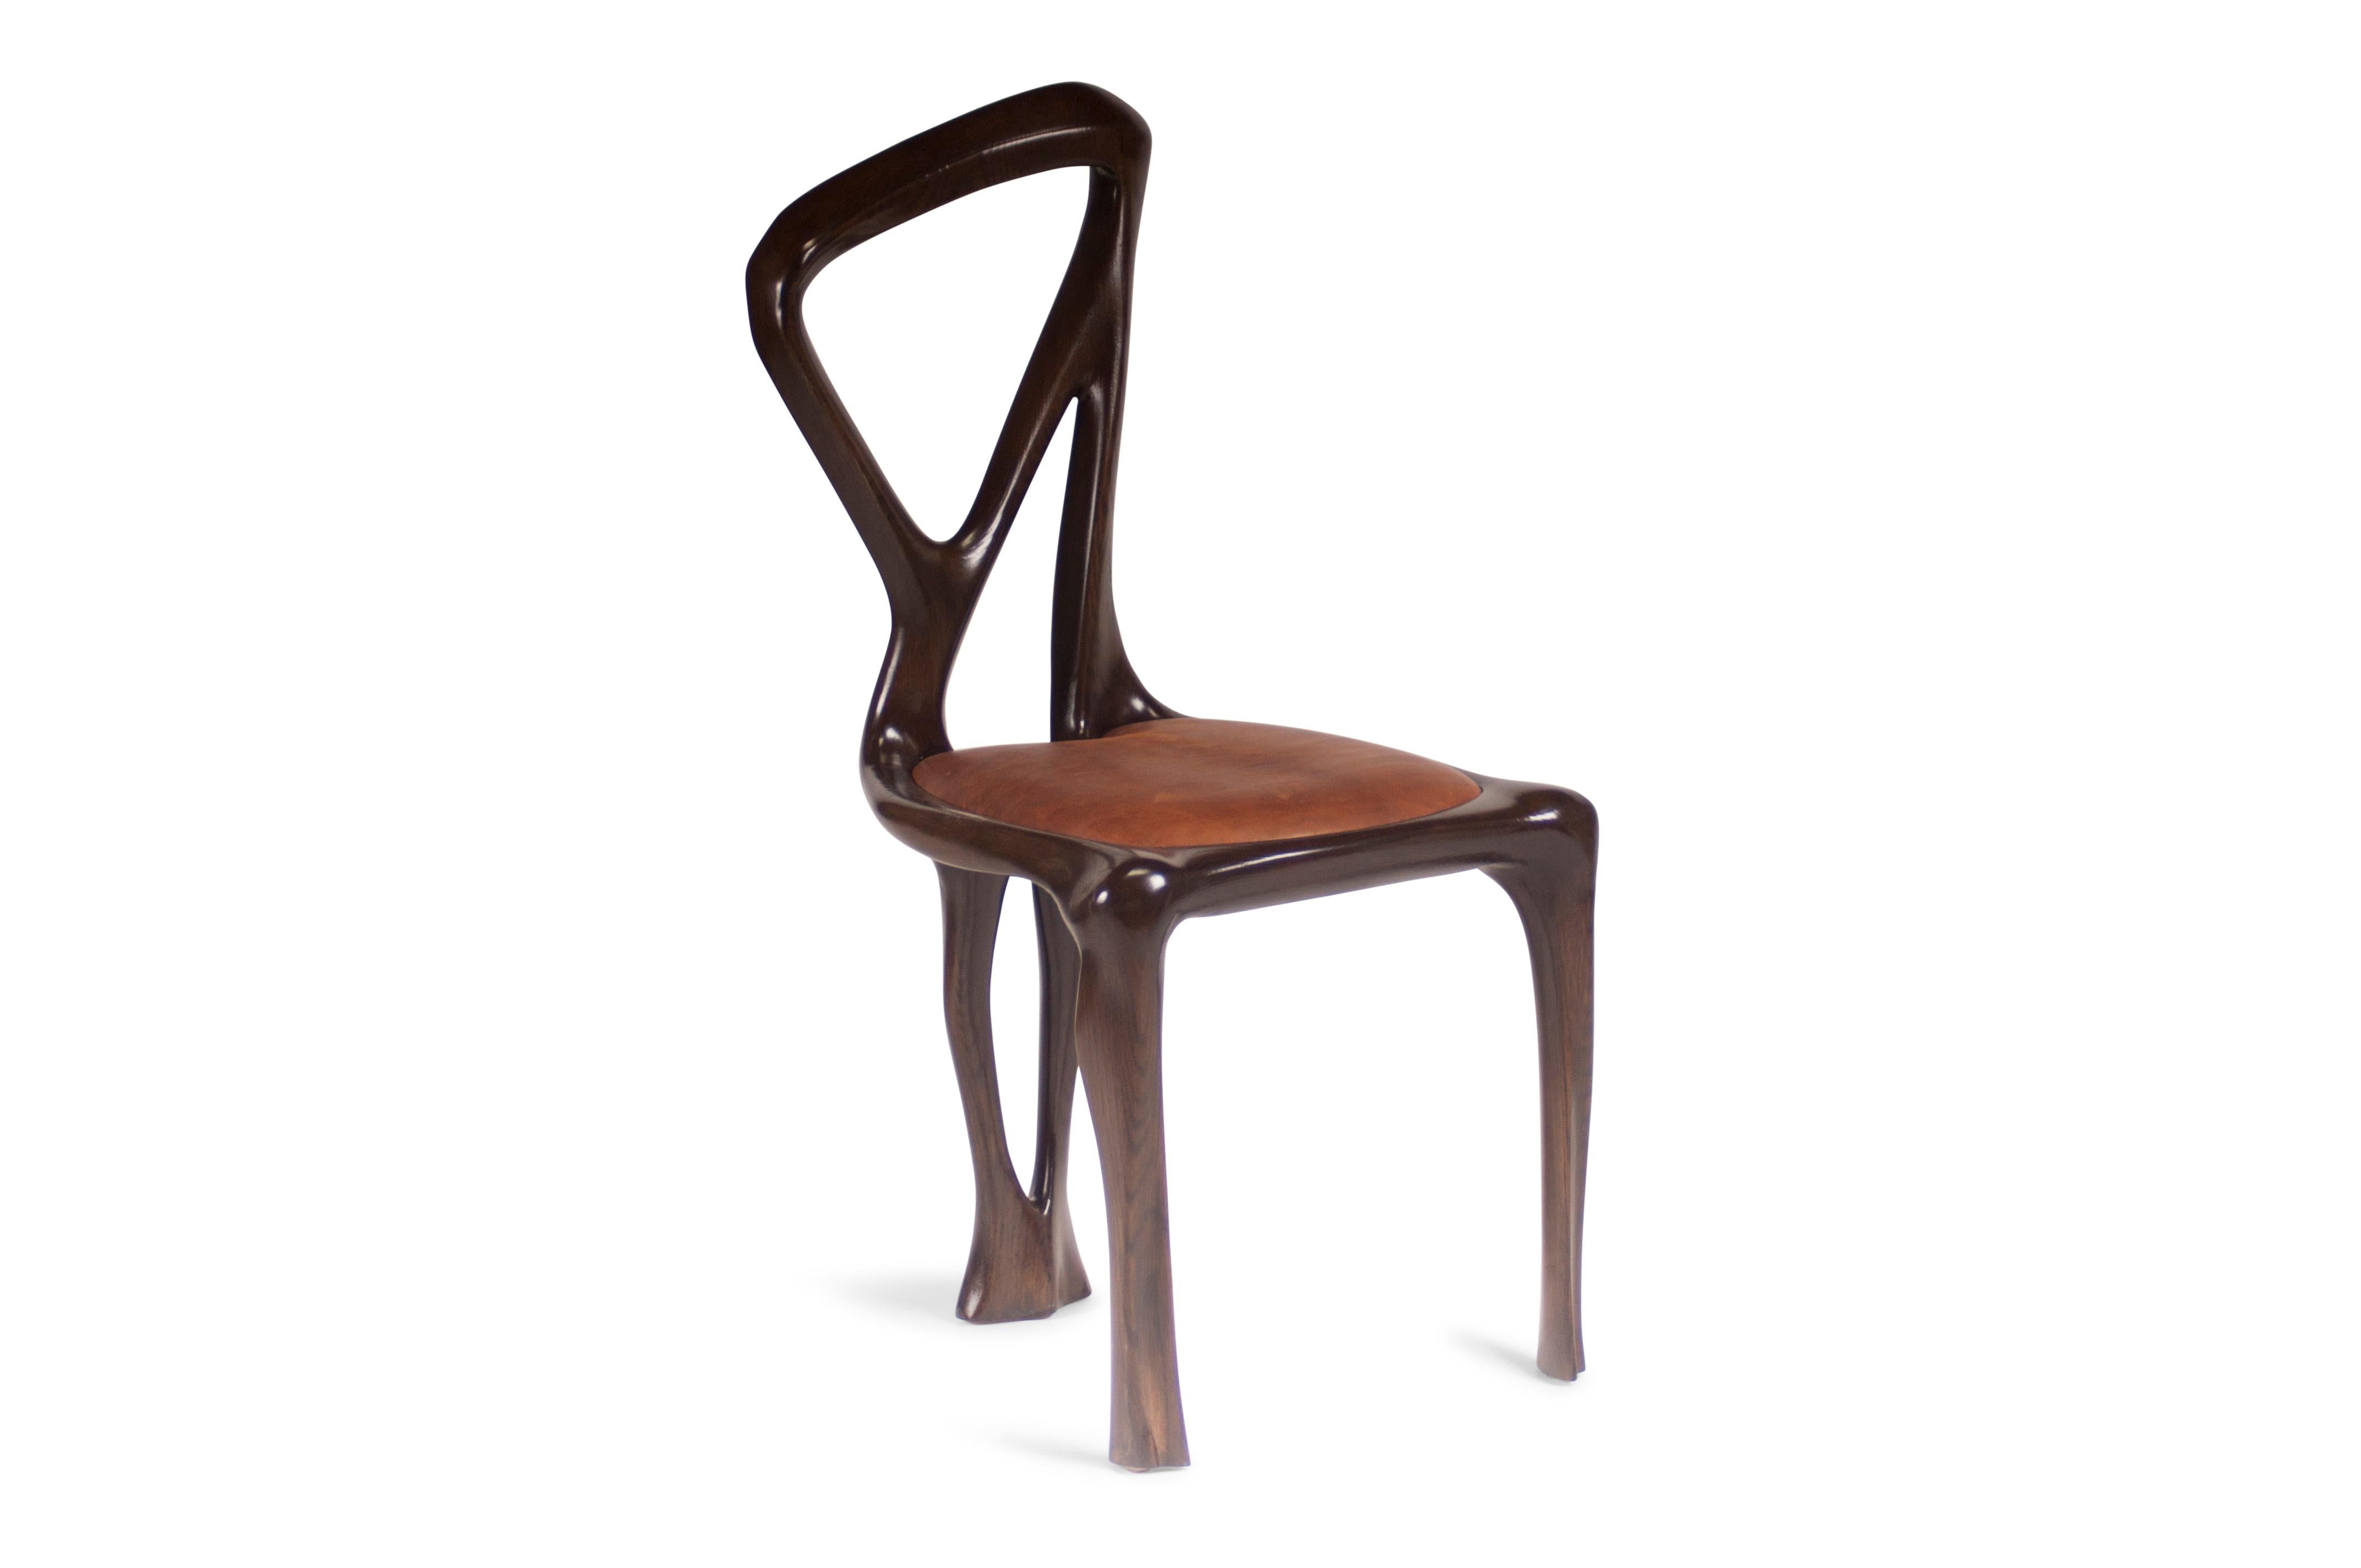 Dining chair designed by Amorph made out of solid ash wood and leather. It is stained dark walnut.
Dimension: 38